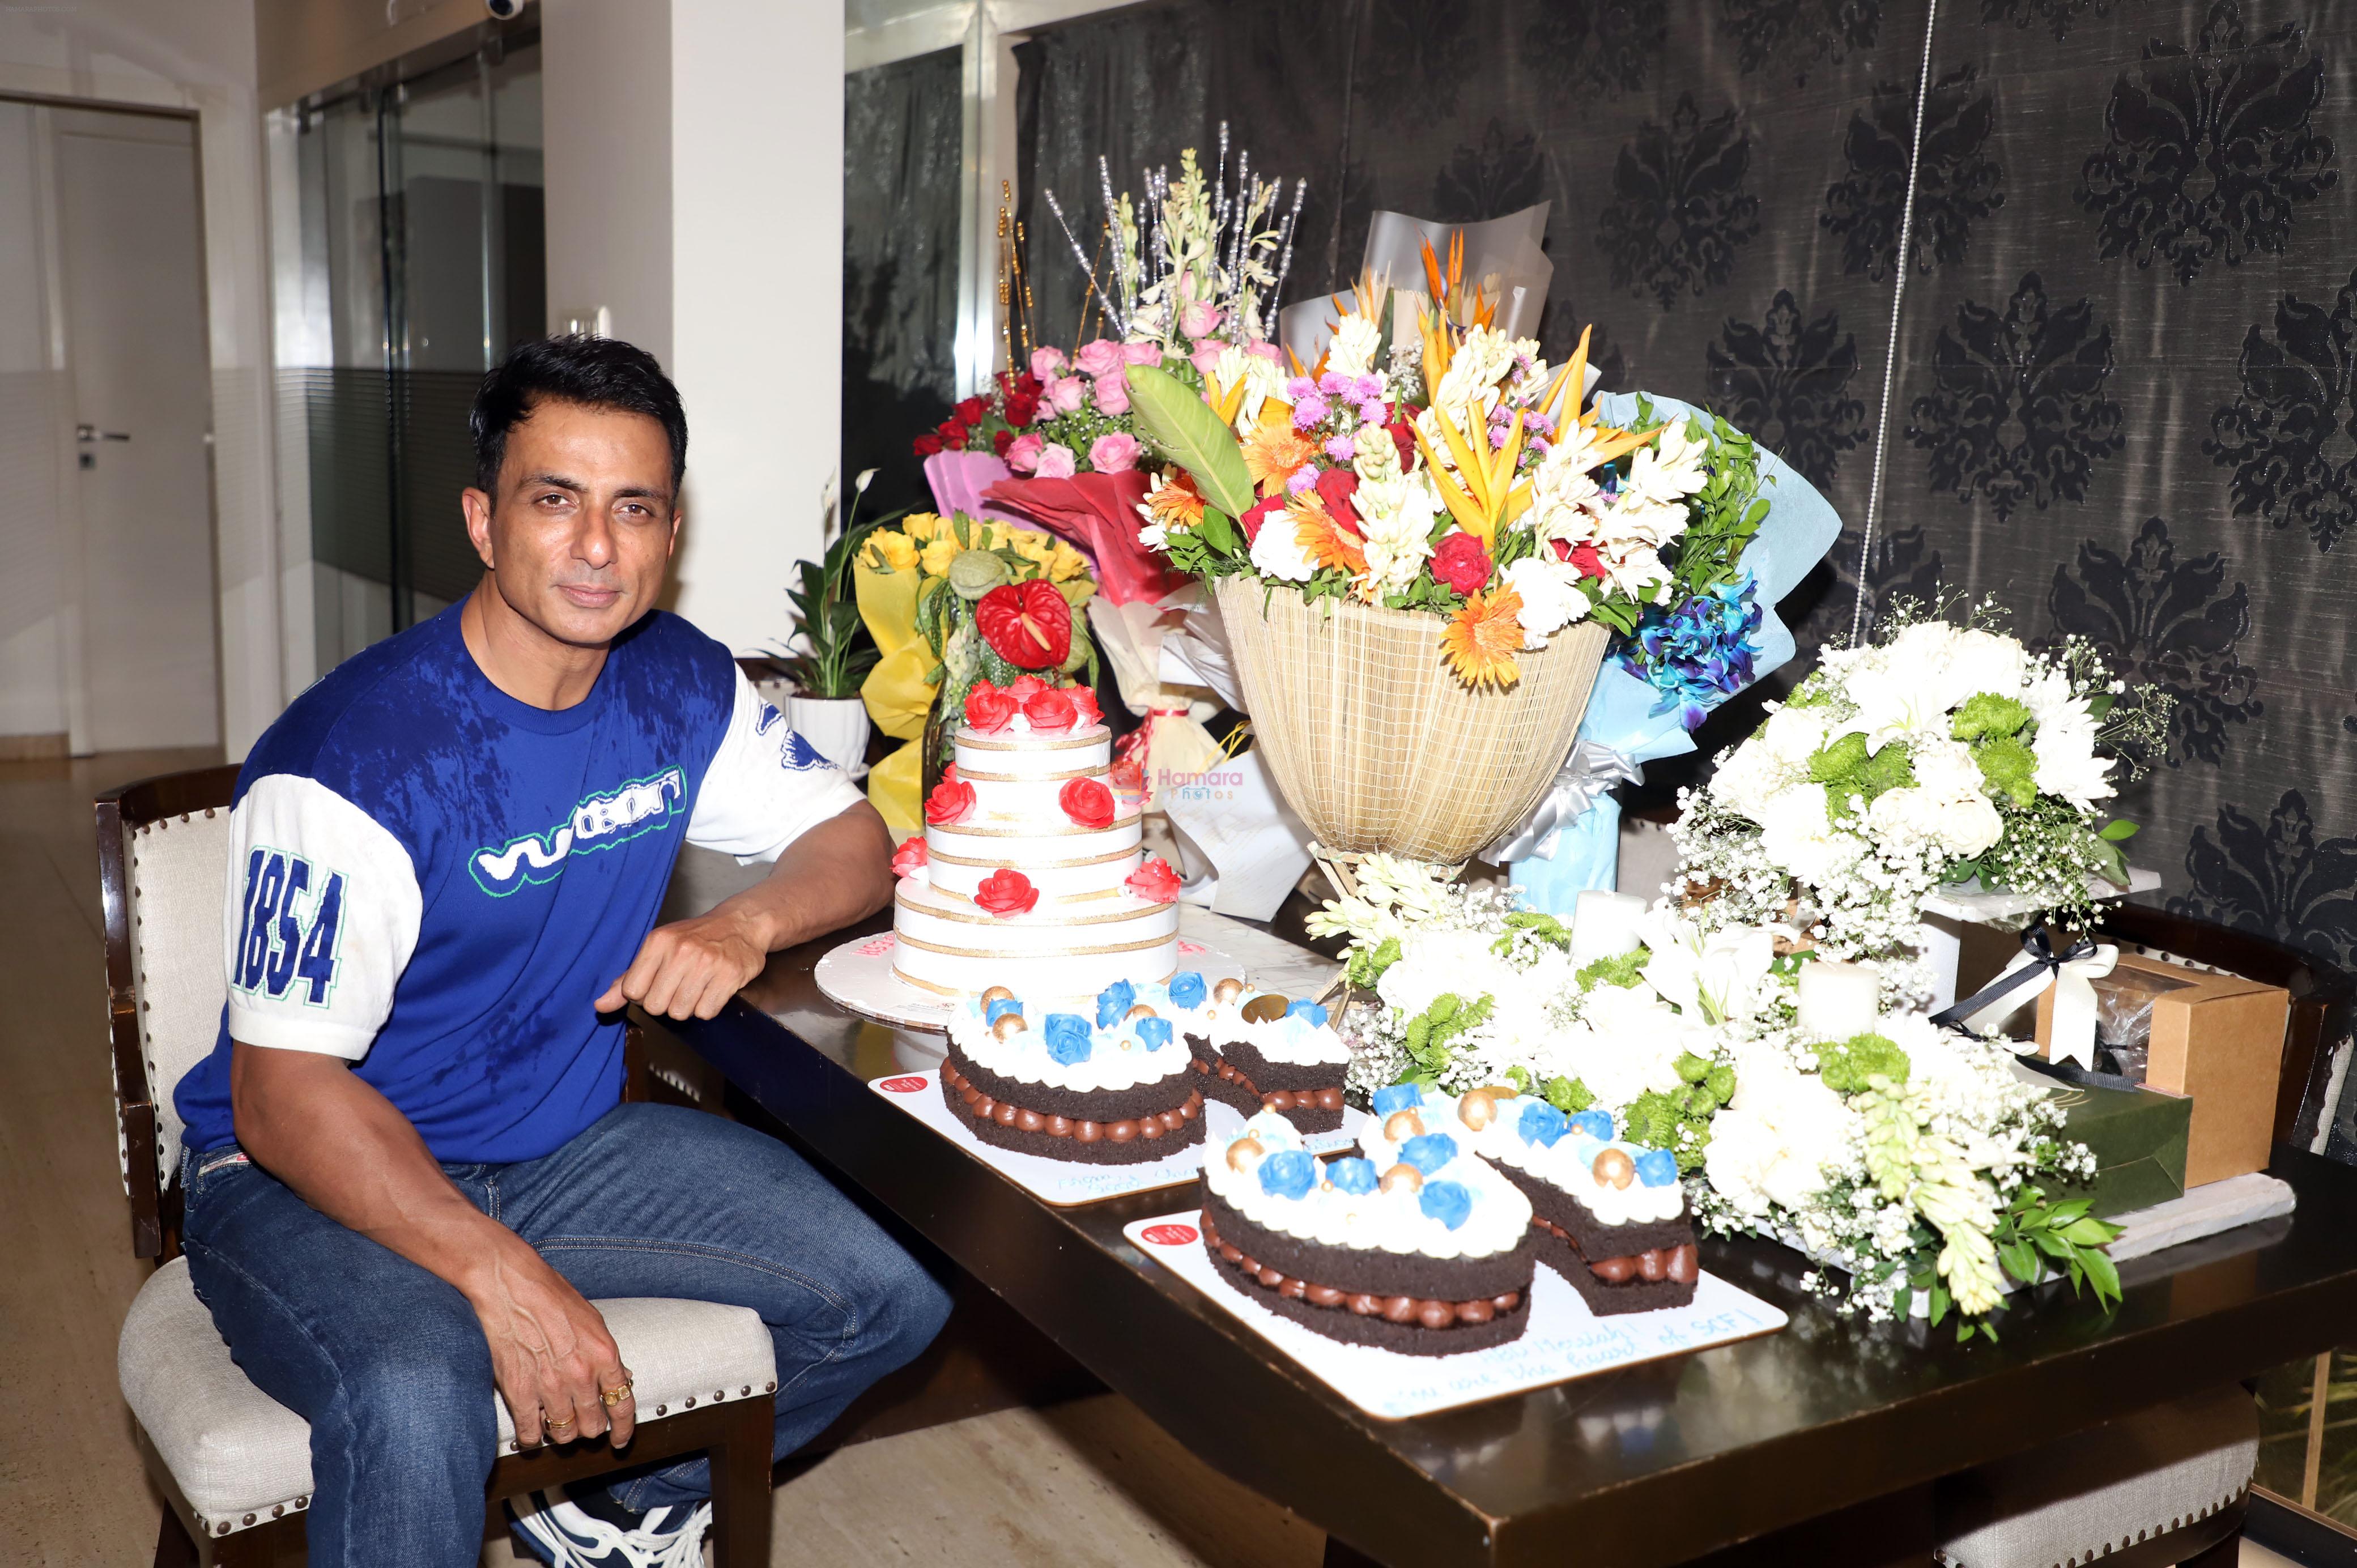 Sonu Sood celebrates his birthday with fans at his home on 30 July 2023